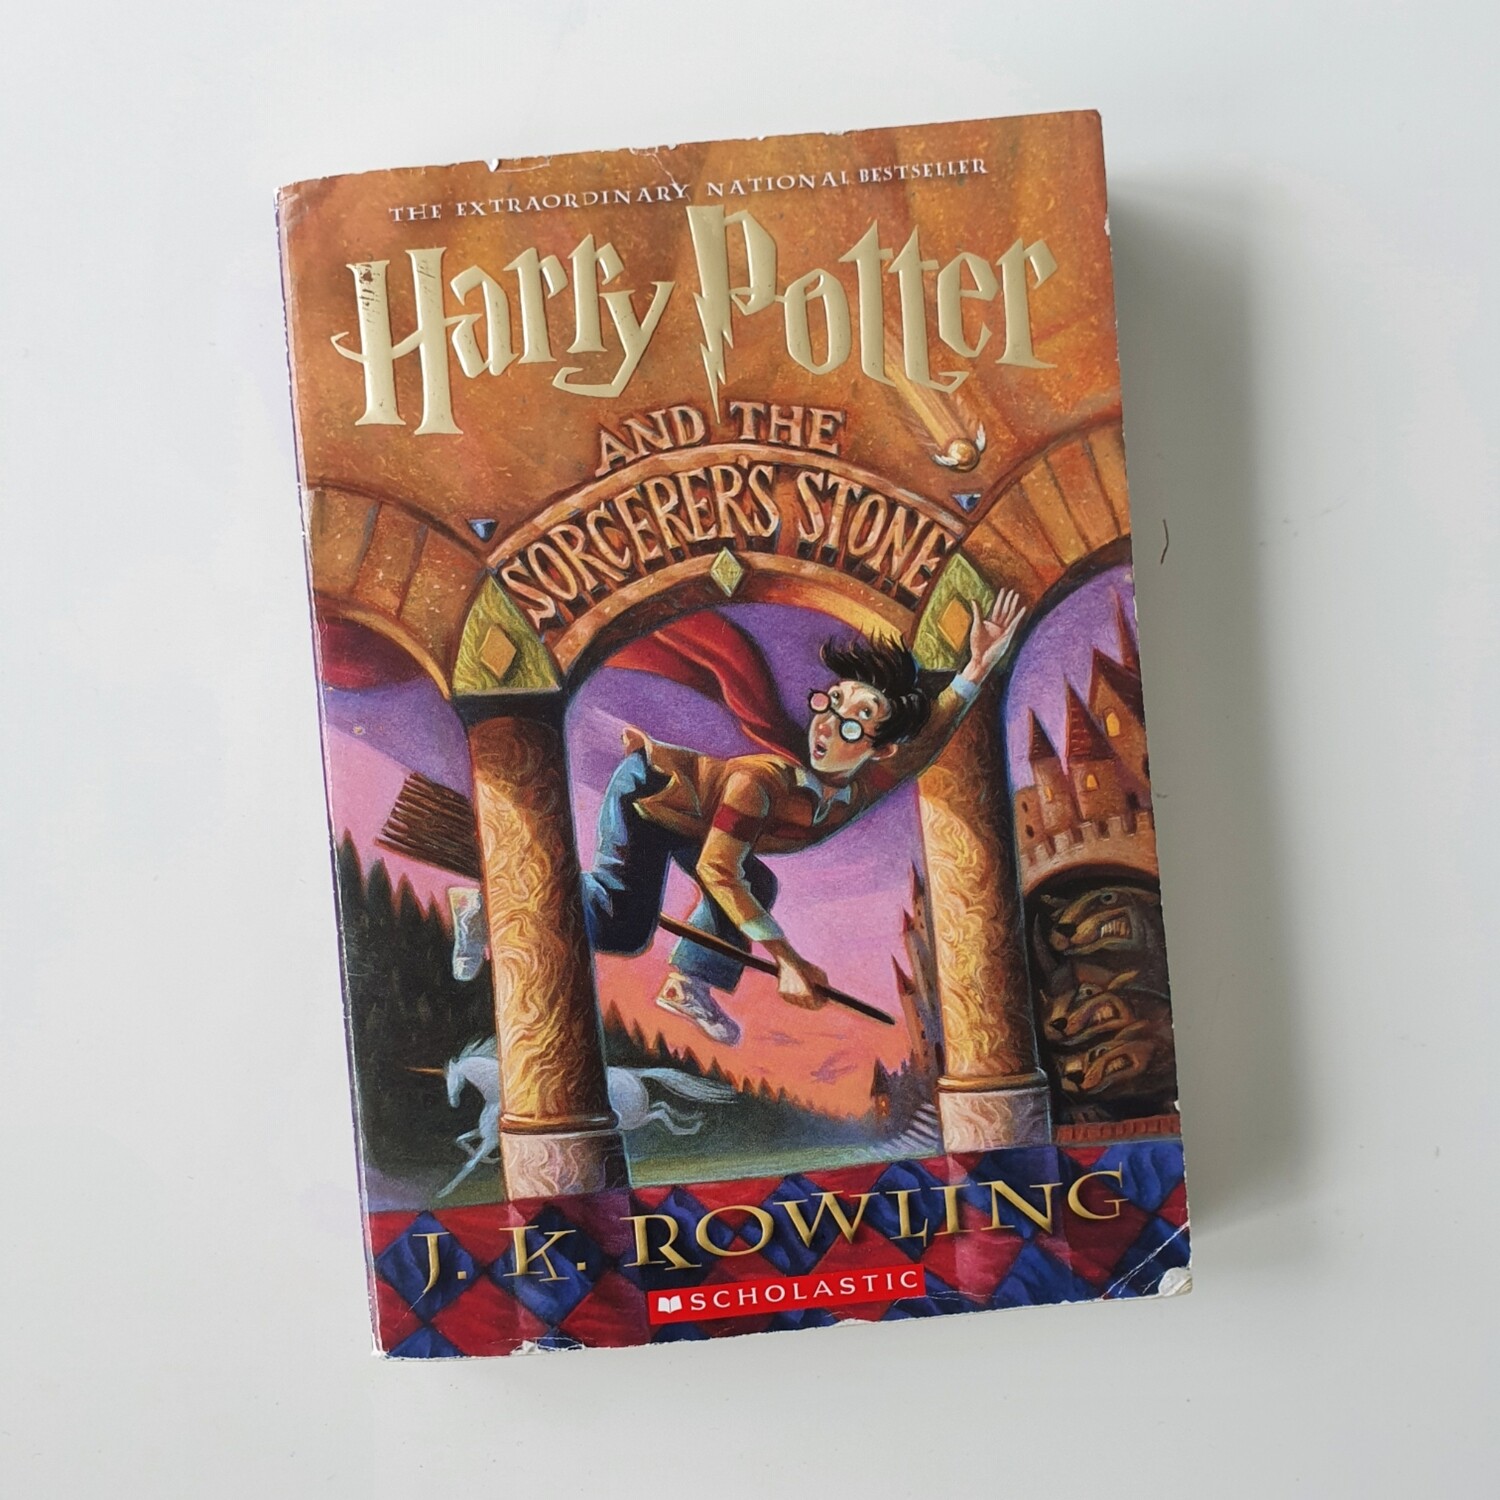 Harry Potter and the Sorcerer's Stone Notebook made from a paperback book